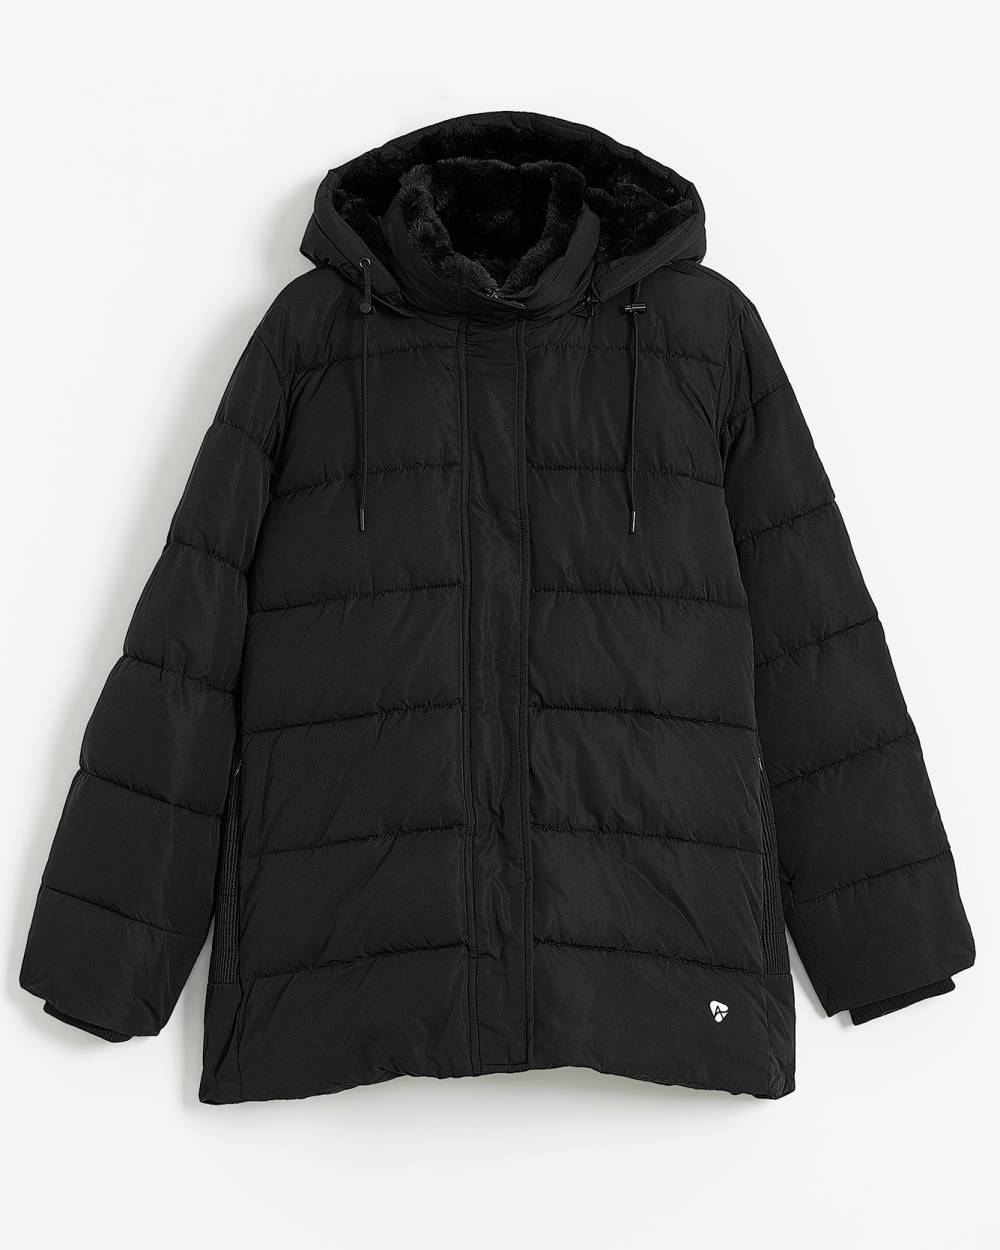 Responsible, Black Quilted Snow Jacket - Active Zone | Penningtons